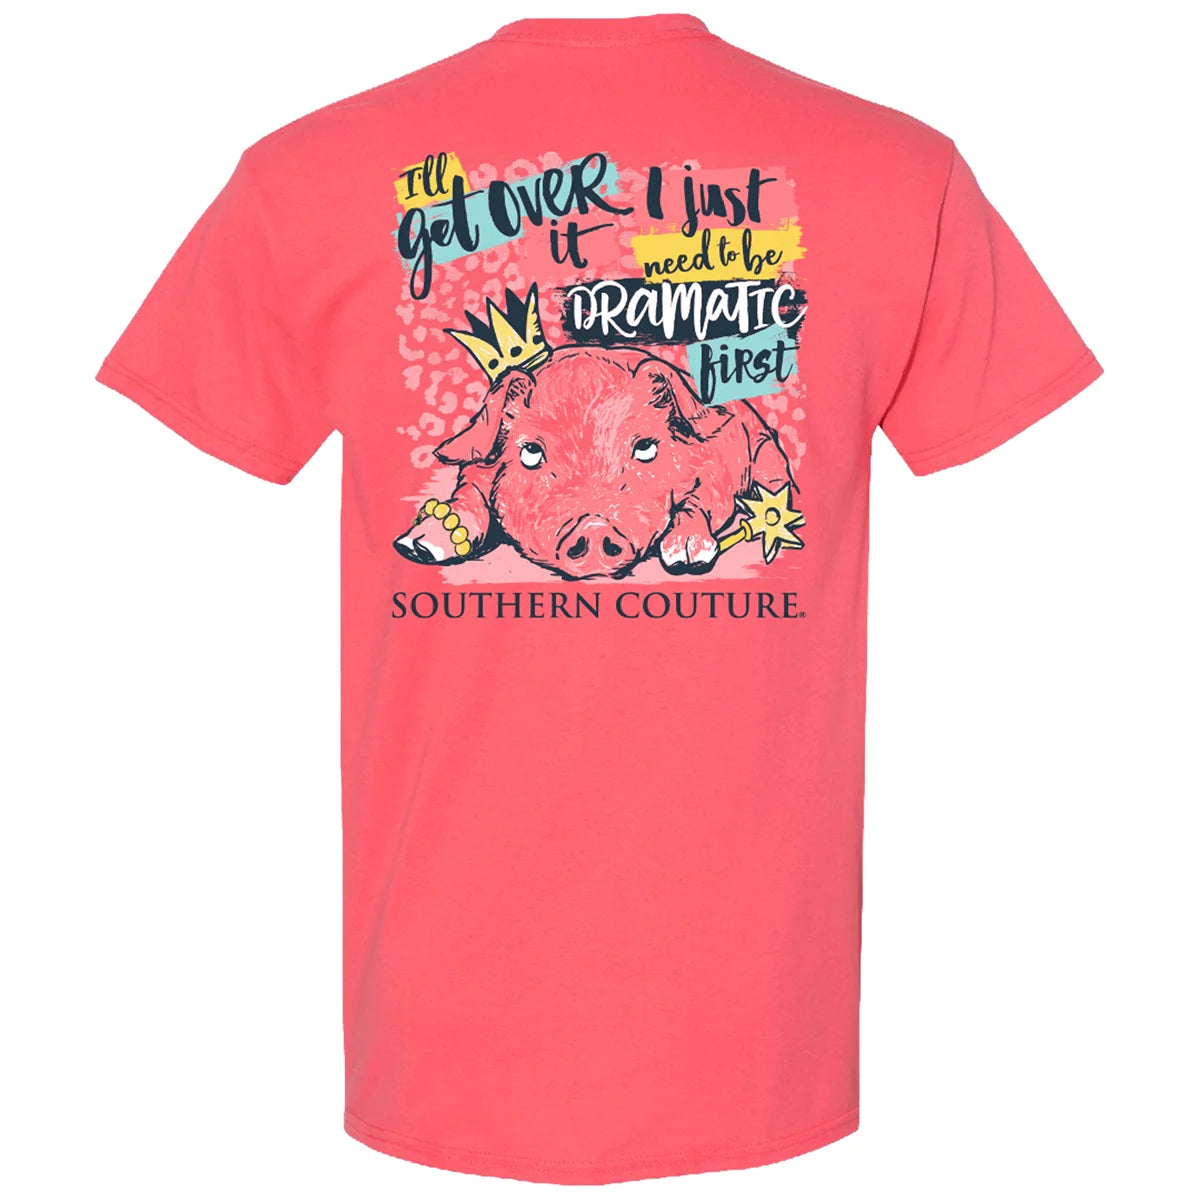 SOUTHERN COUTURE CLASSIC DRAMATIC PIG T-SHIRT